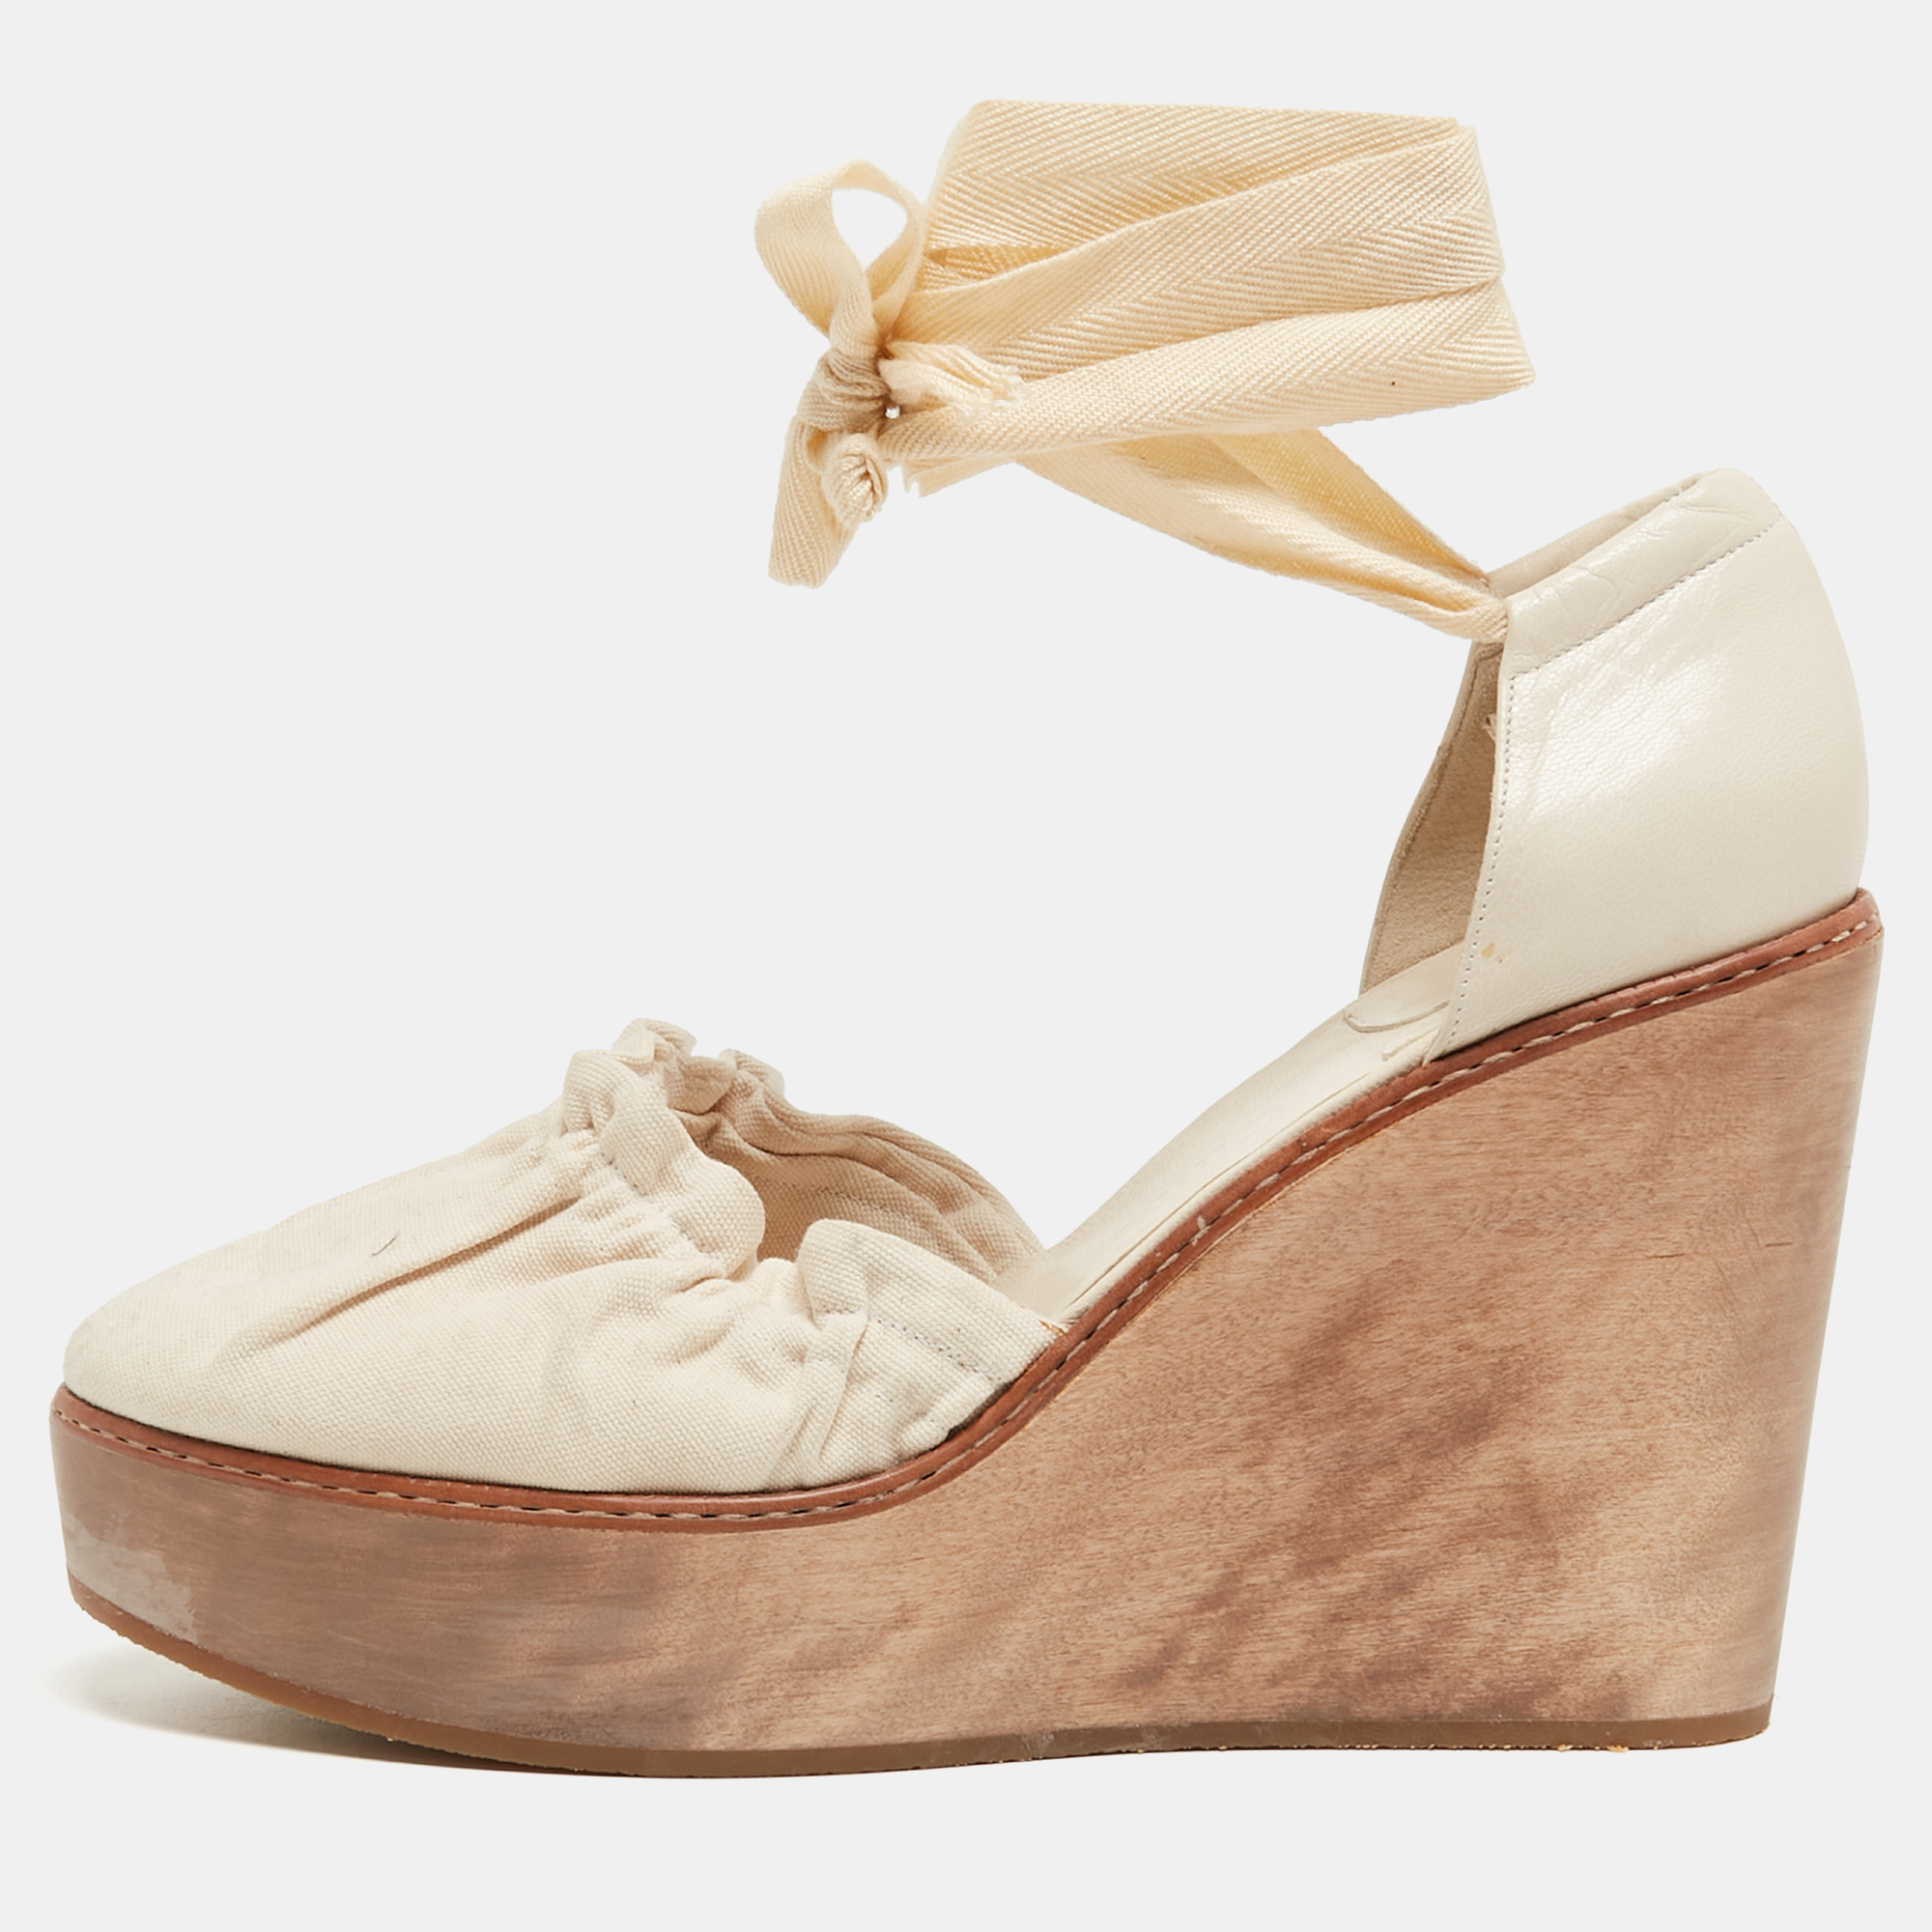 Chloe Cream Leather And Canvas Wedge Platform Ankle Tie Pumps Size 41